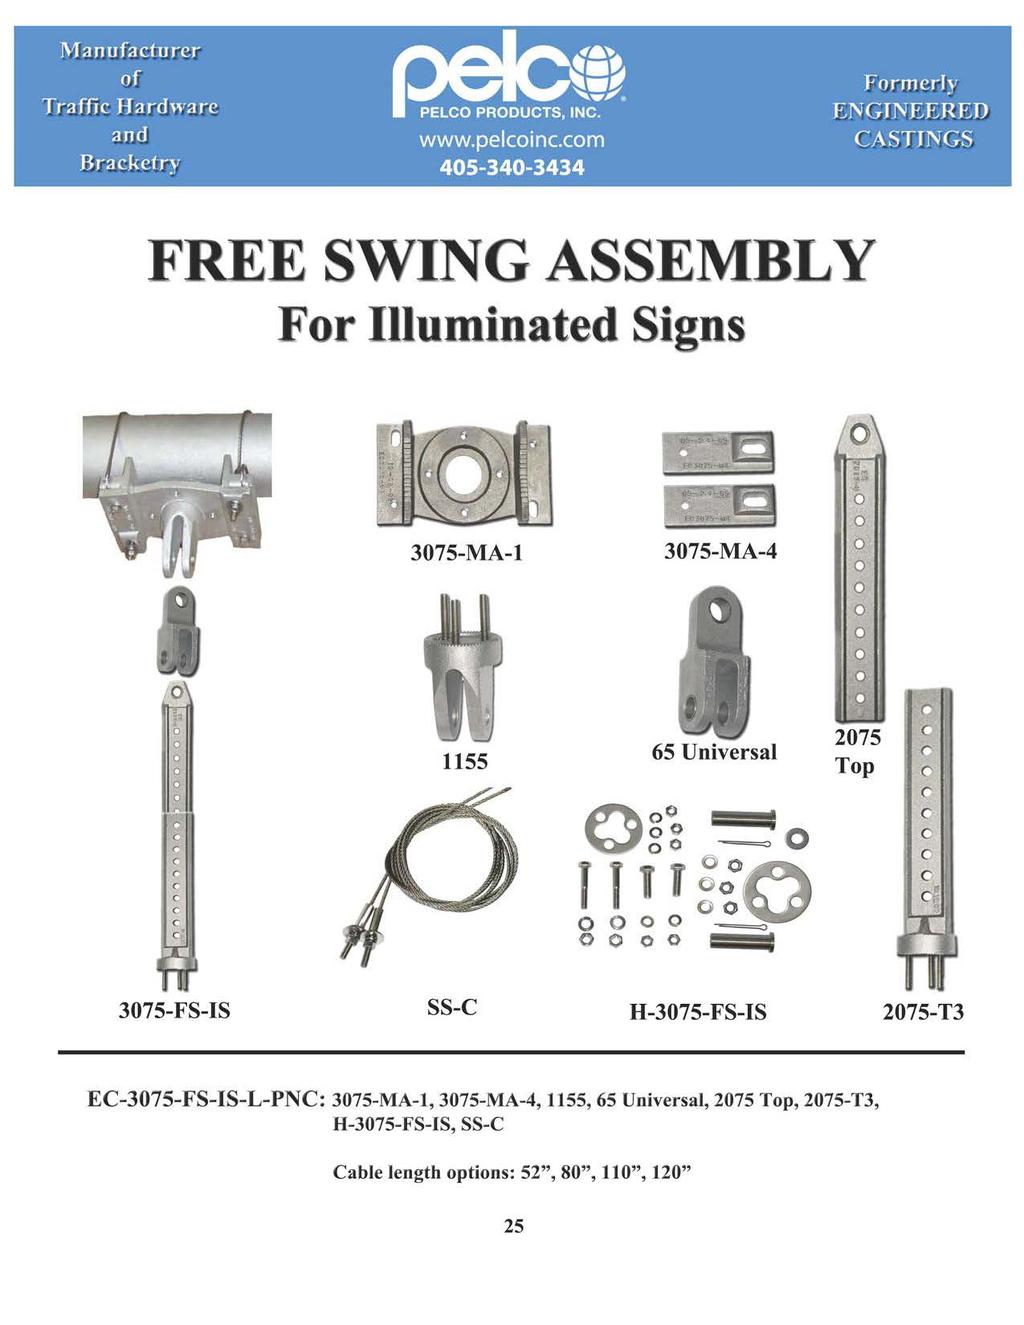 FREE SWING ASSEMBLY For Illuminated Signs 375-MA-1 375-MA-4 a 1155 65 Universal 275 Top a a 375-FS-IS SS-C H-375-FS-IS 275-T3